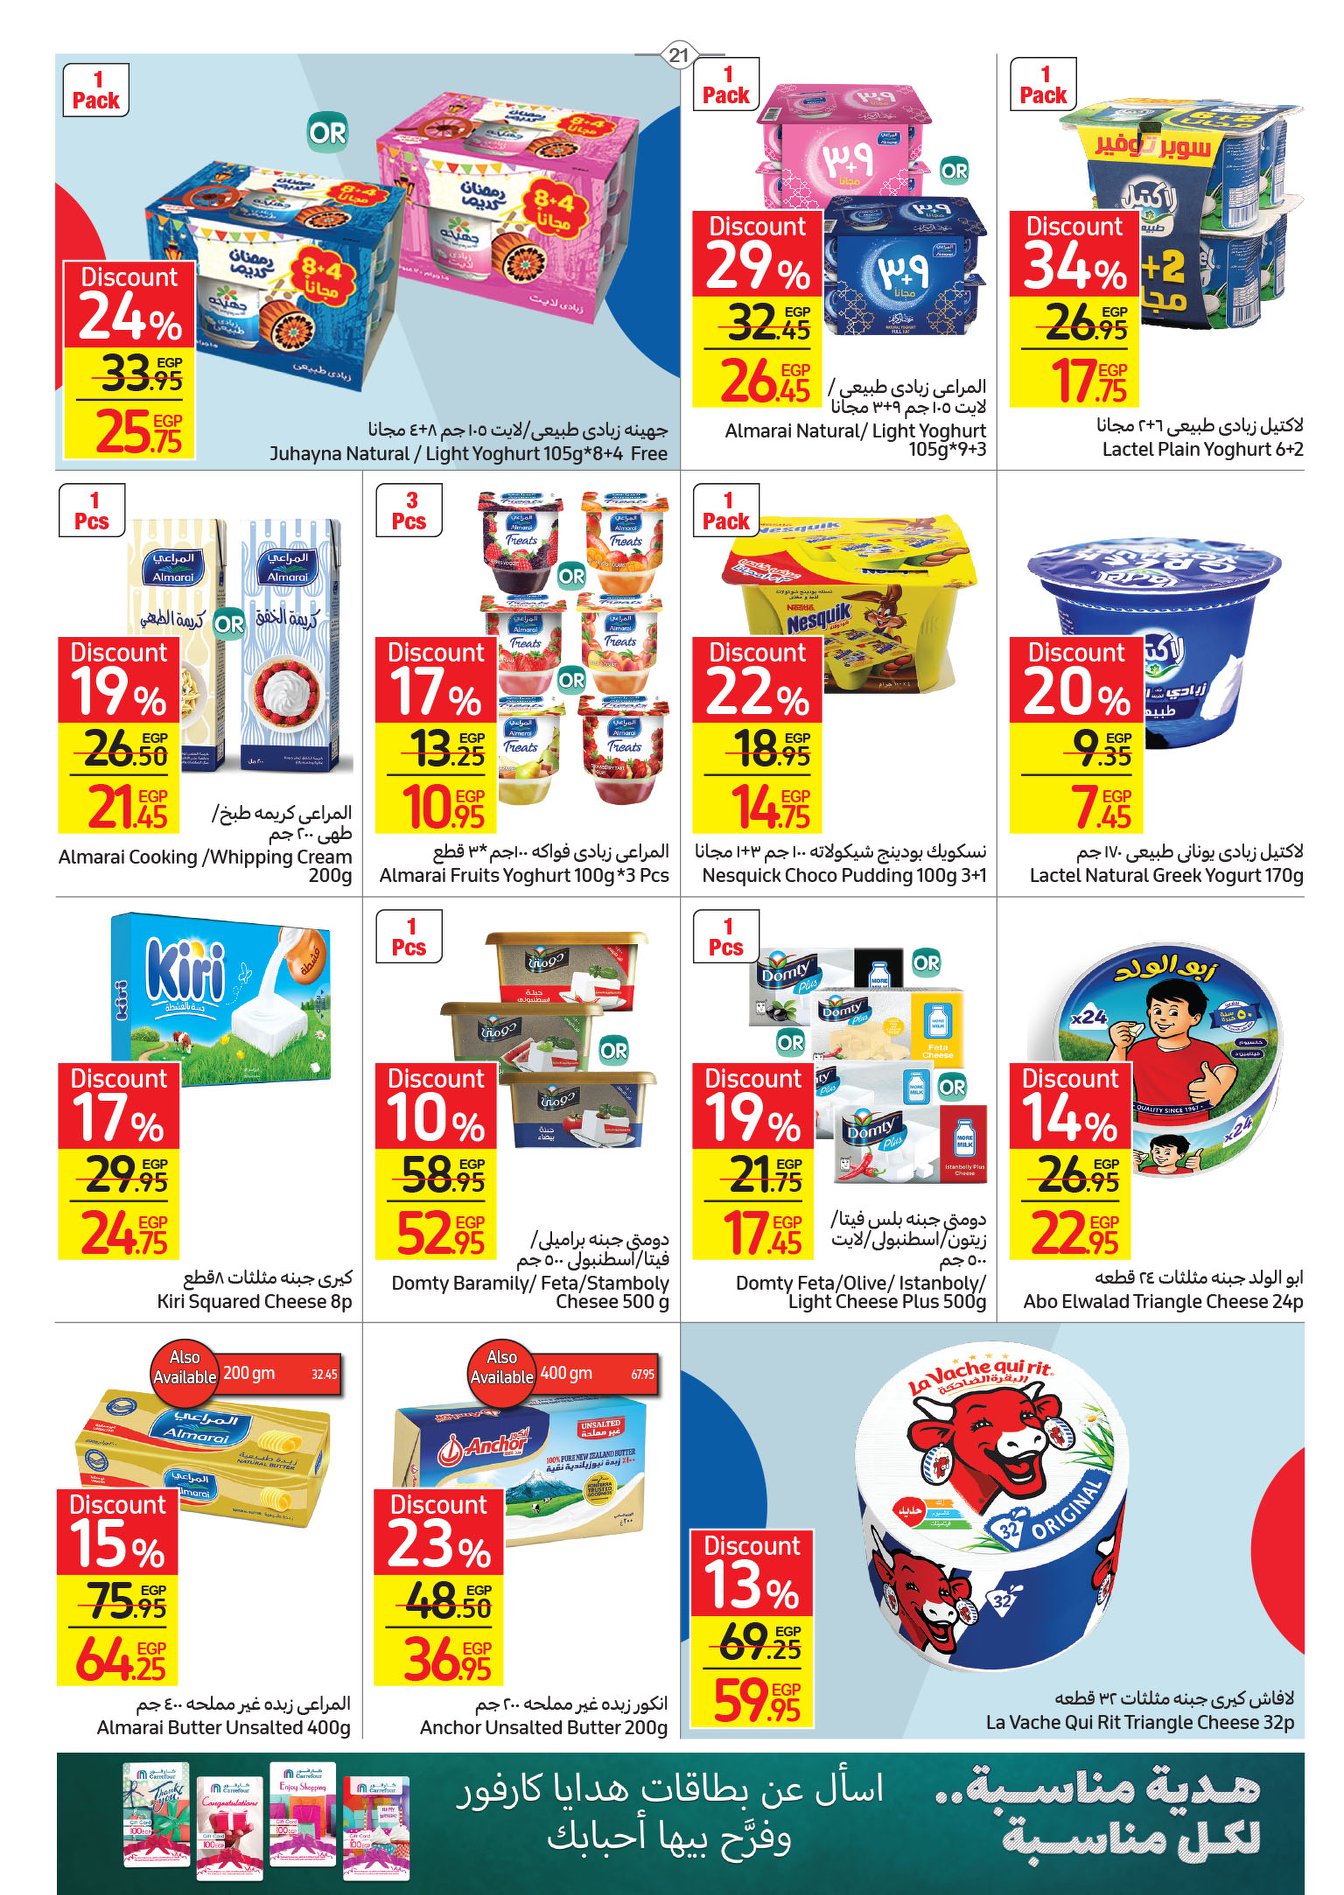 Enjoy now the strongest Carrefour offers from 17 to 25 April 2022.. Huge discounts on home essentials 4